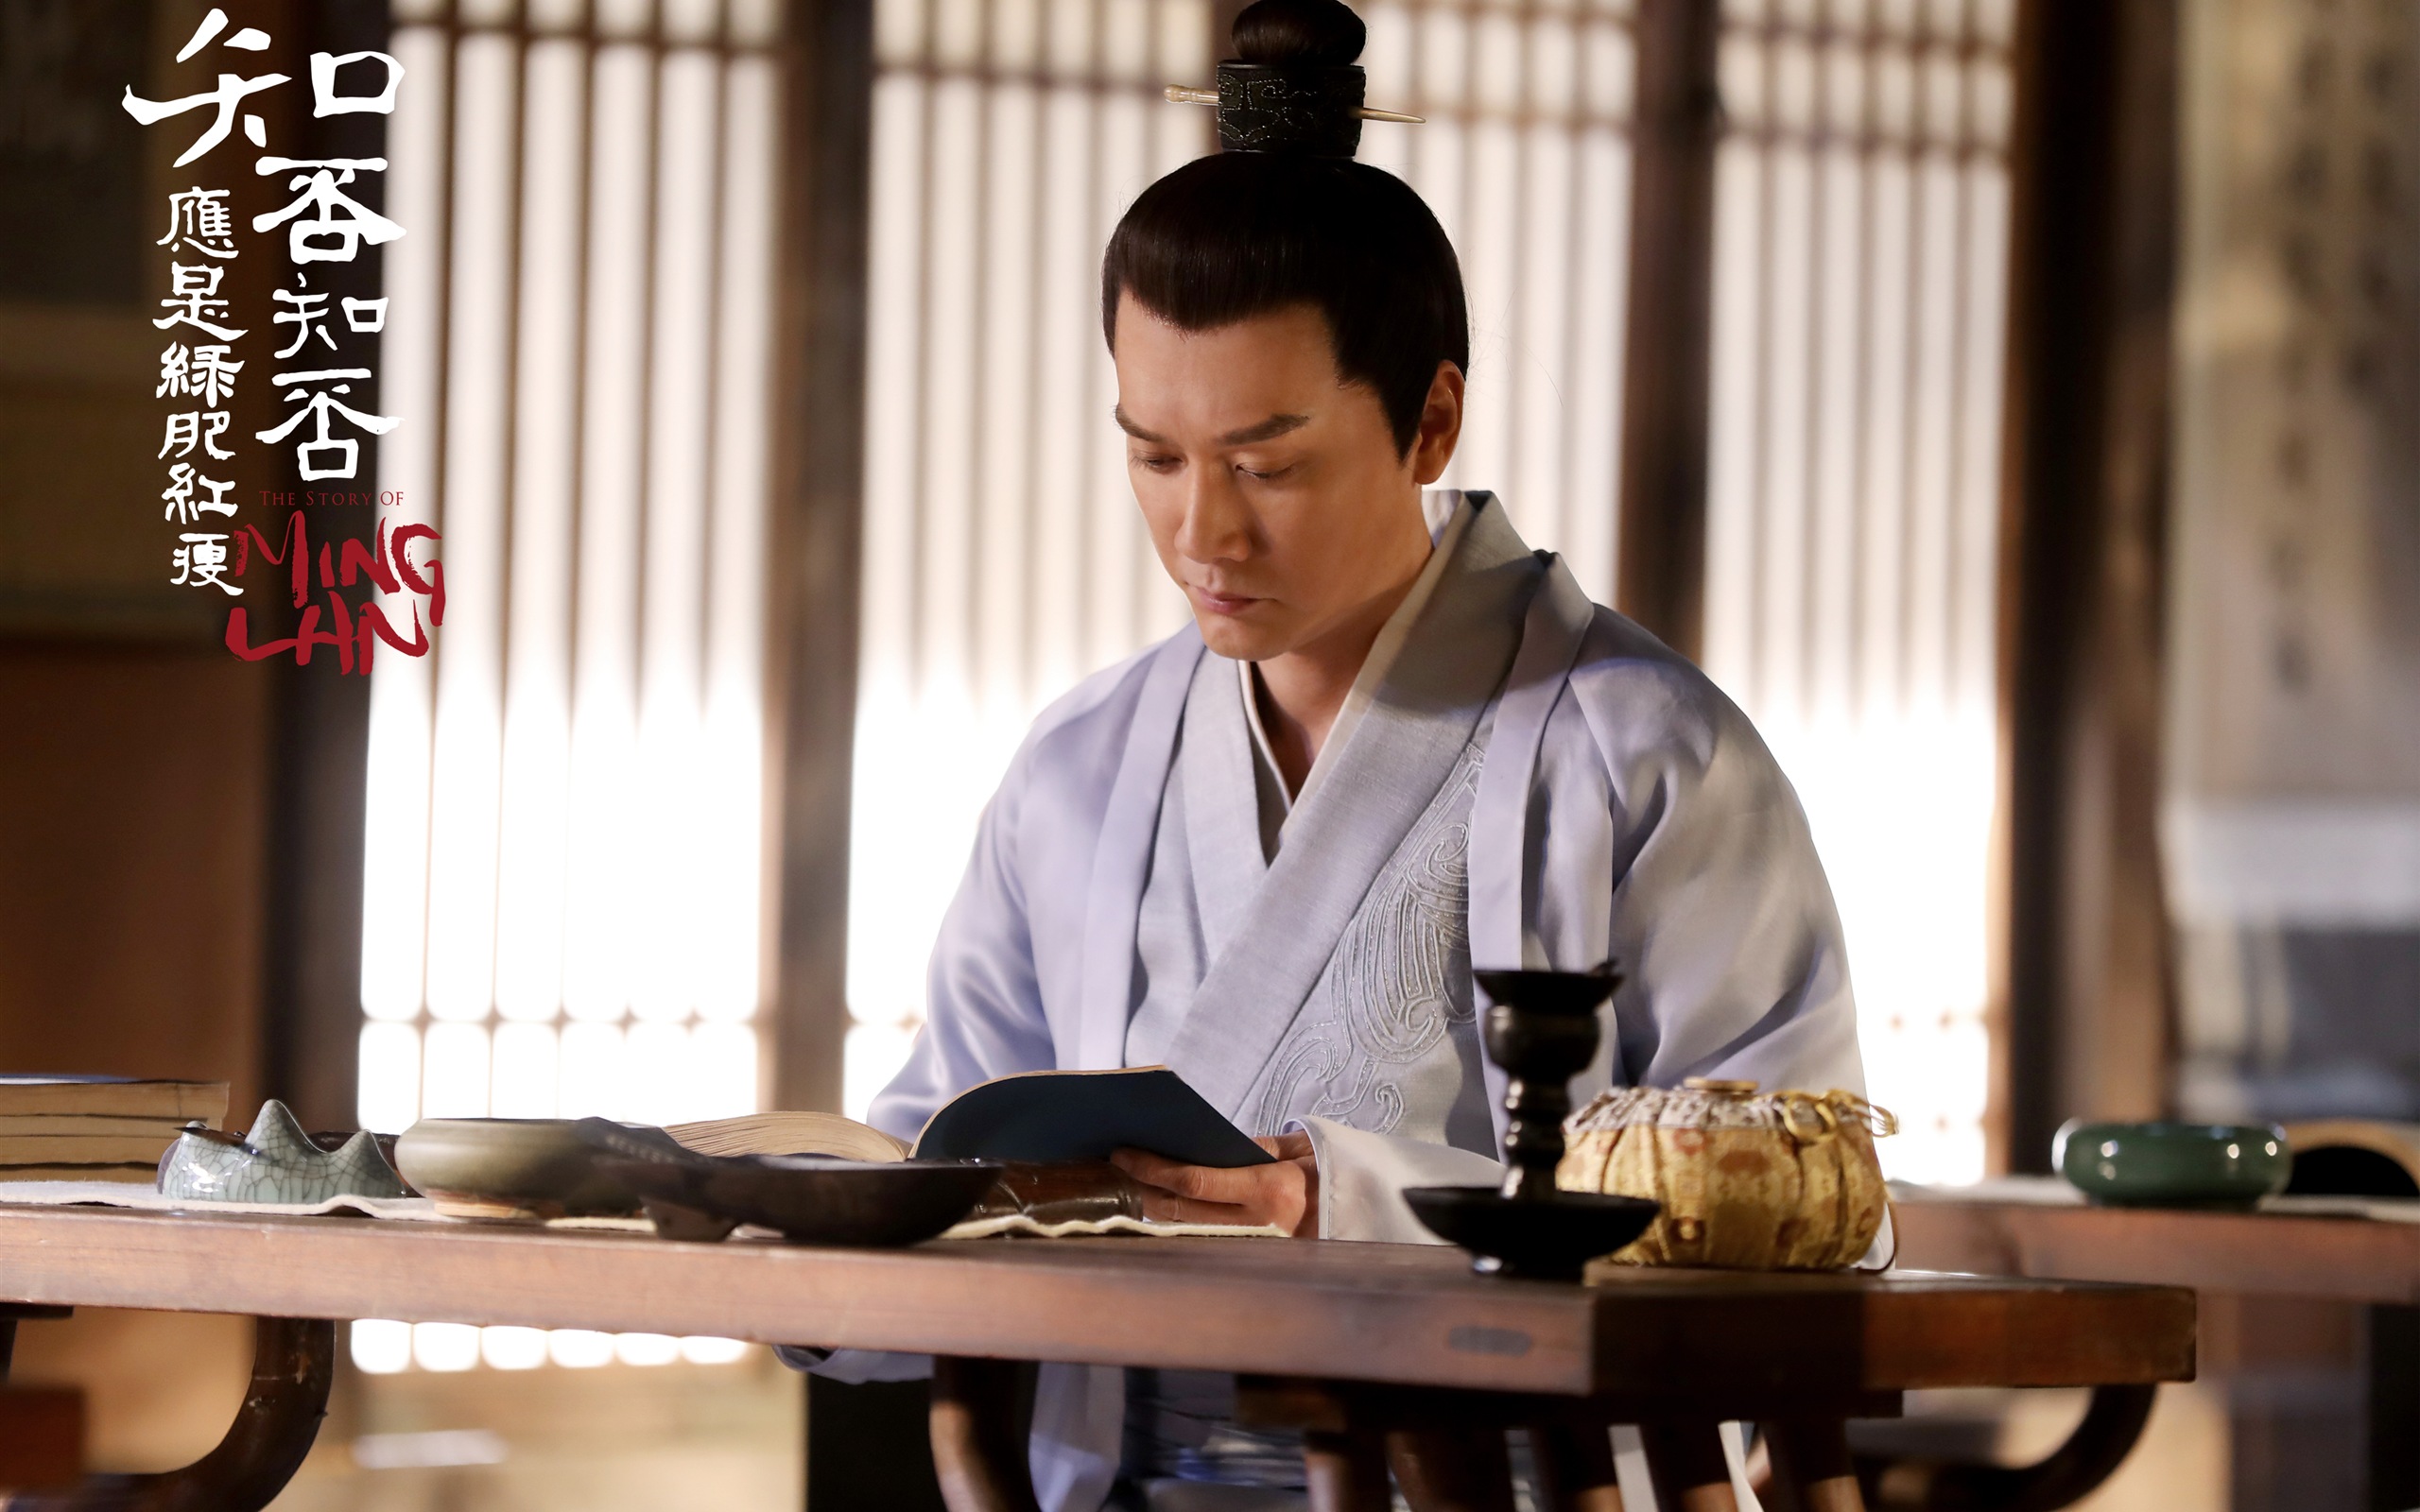 The Story Of MingLan, TV series HD wallpapers #56 - 2560x1600